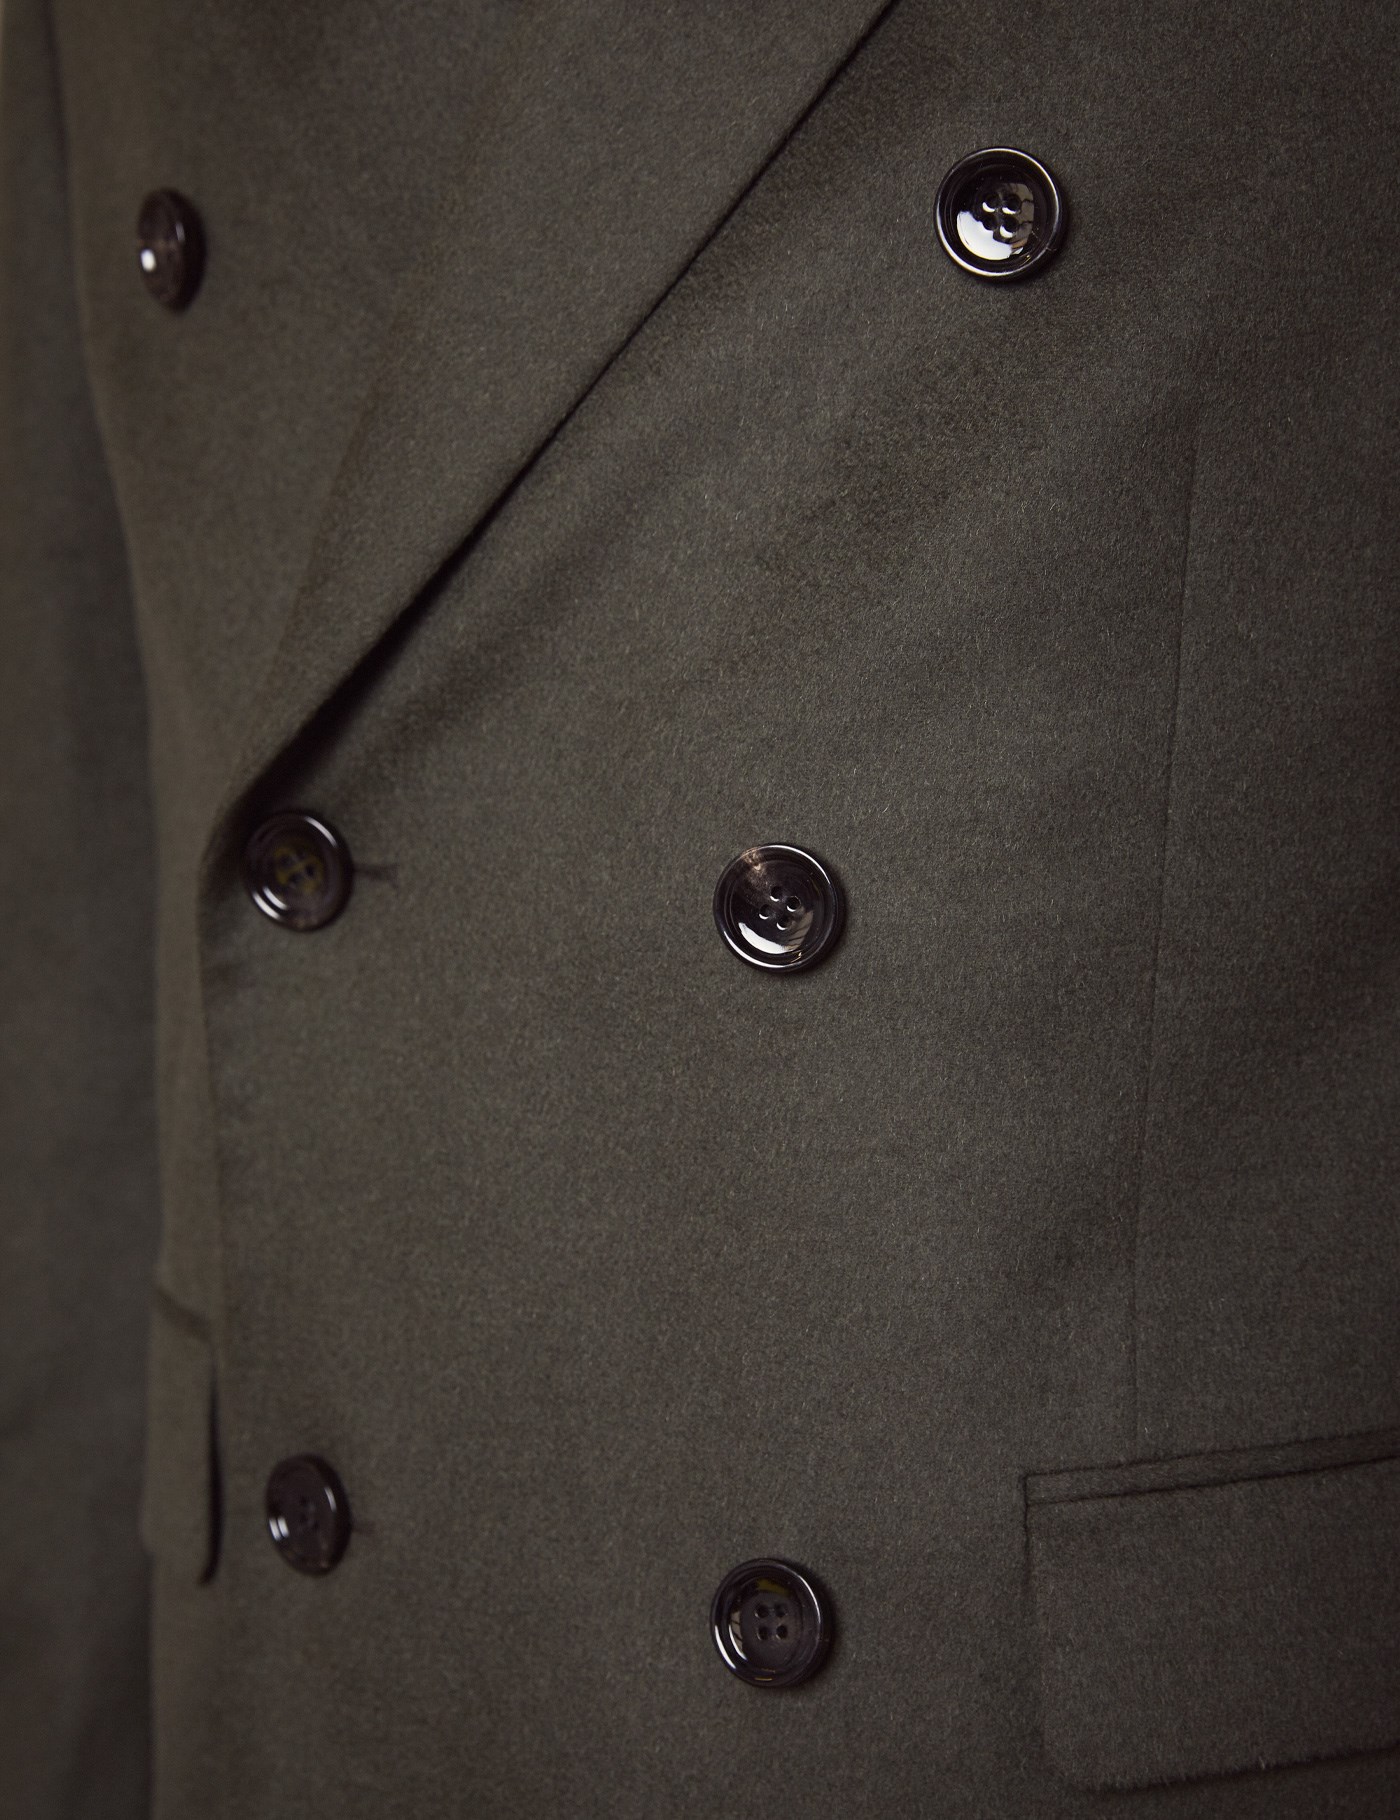 Men’s Double Breasted Green Wool Cashmere Overcoat | Hawes & Curtis